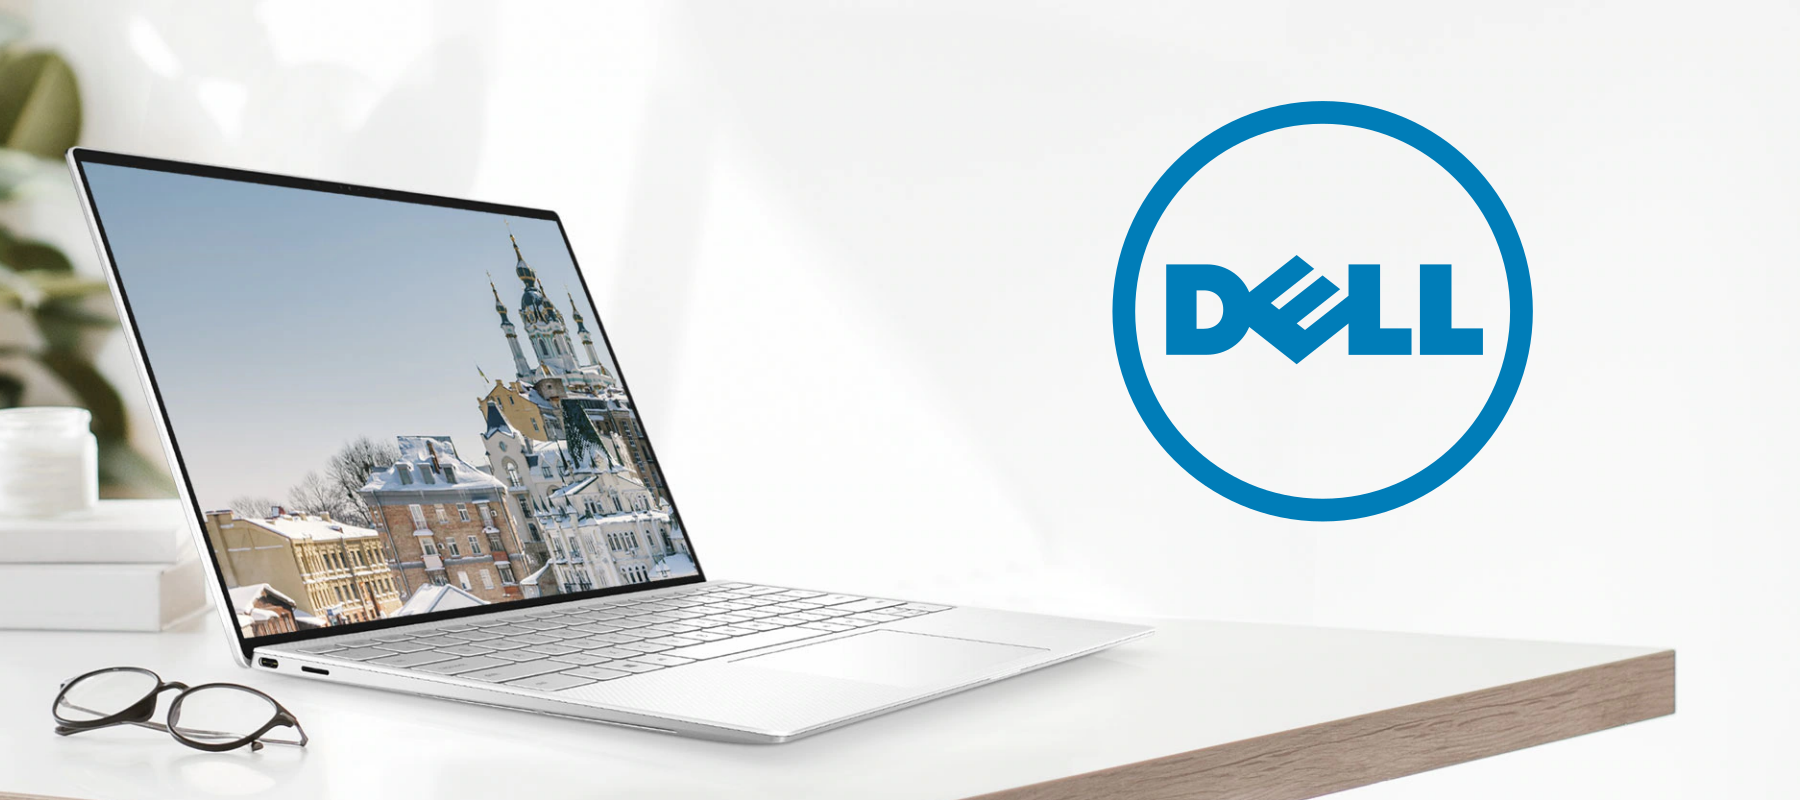 Dell Laptops - Signa has what you need!